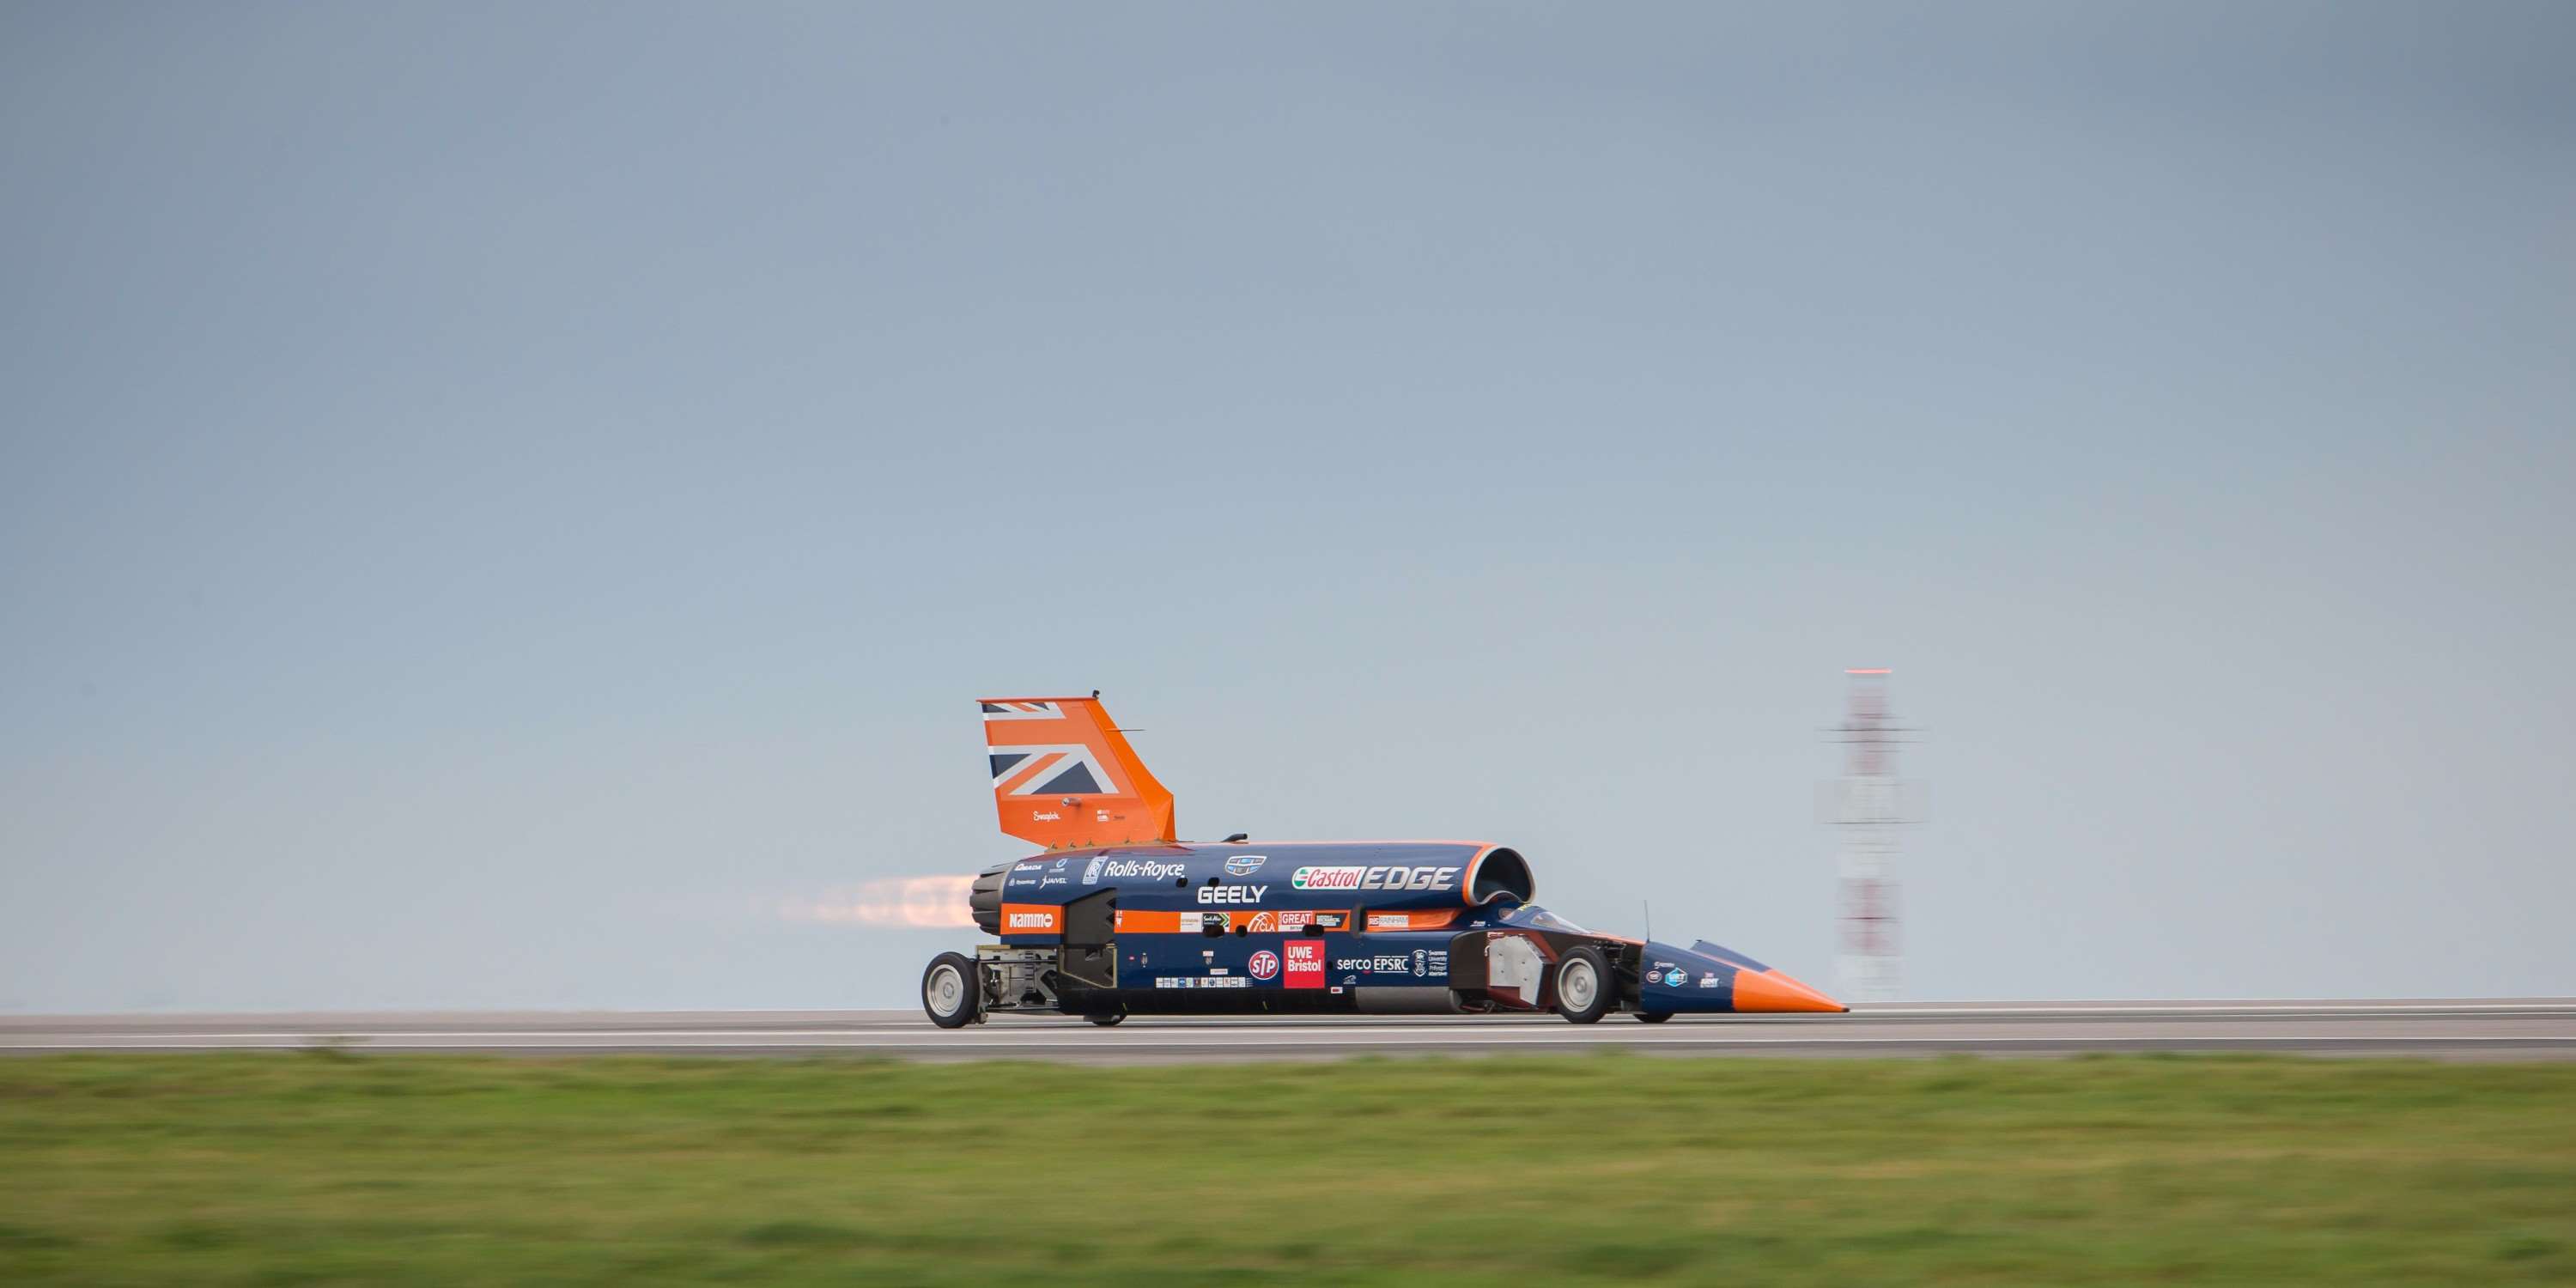 Witnessing history as Bloodhound SSC tests to 200